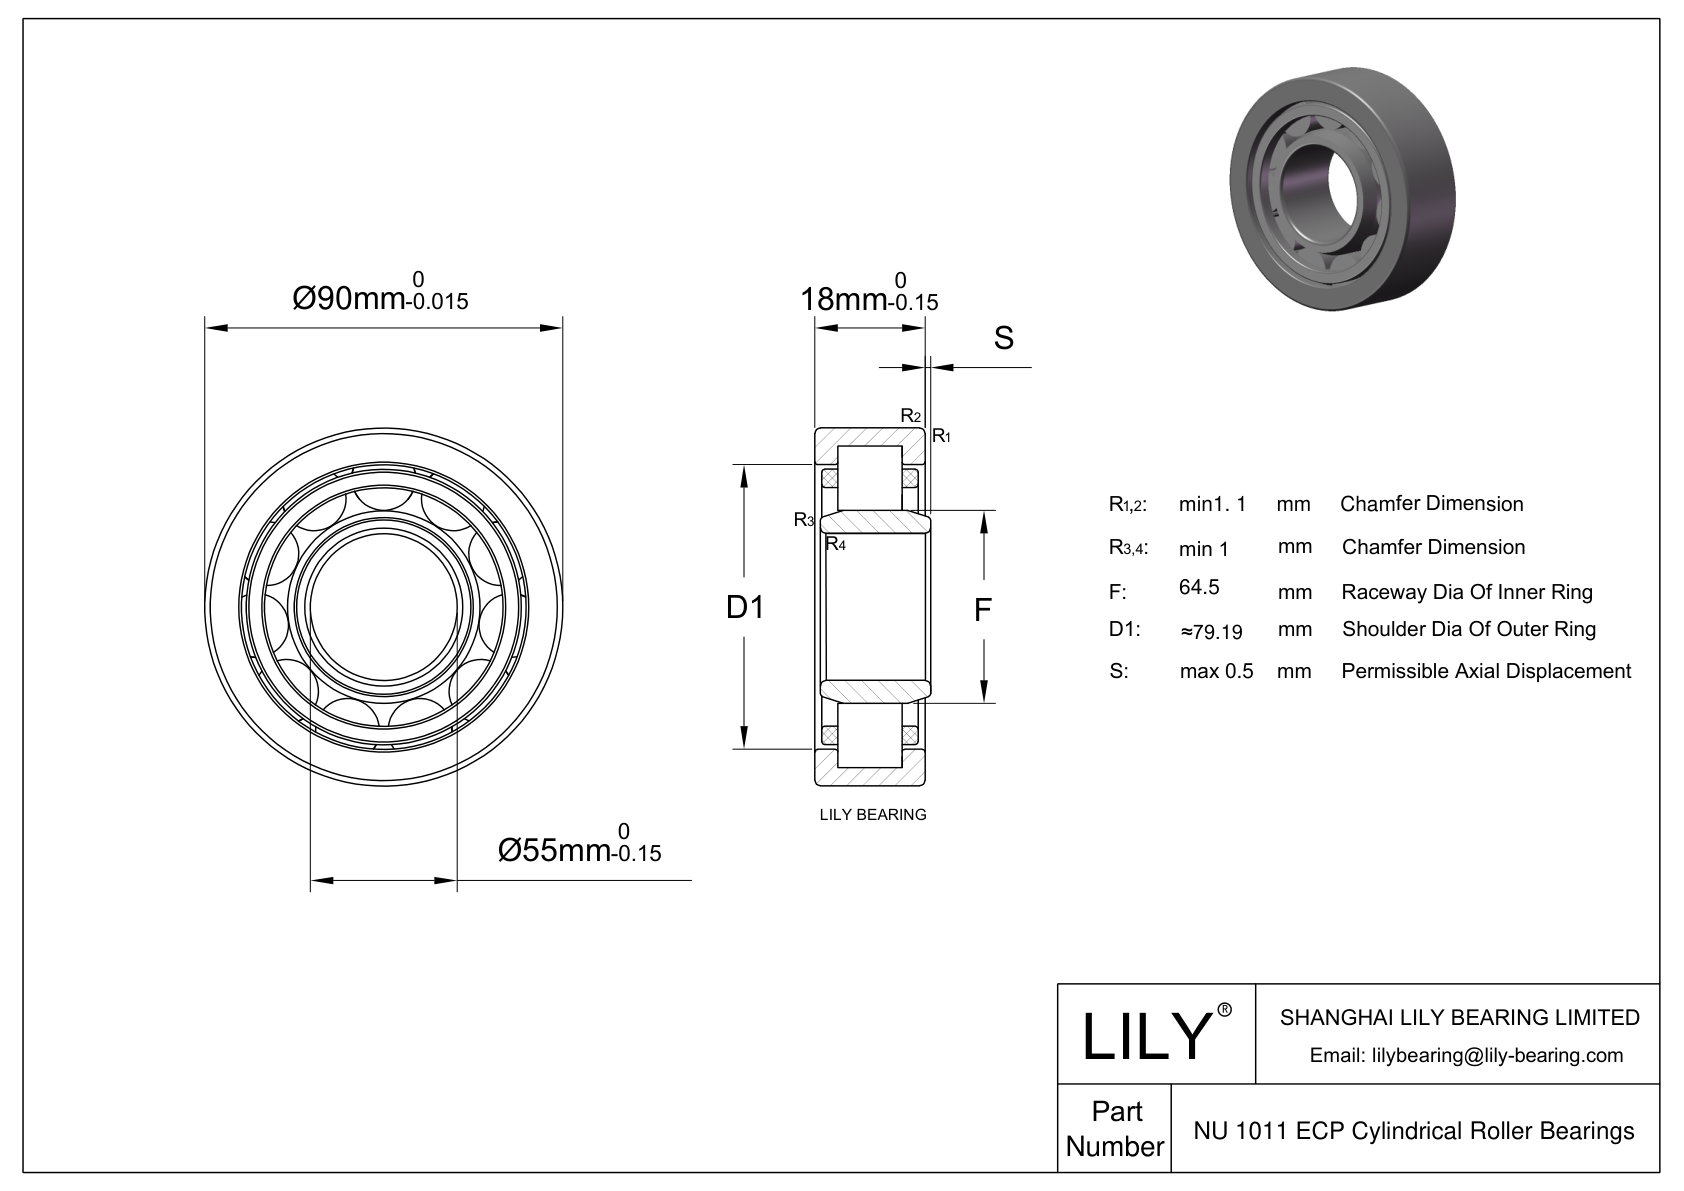 NU 1011 ECP/C3VL0241 Ceramic Coated Cylindrical Roller Bearings cad drawing